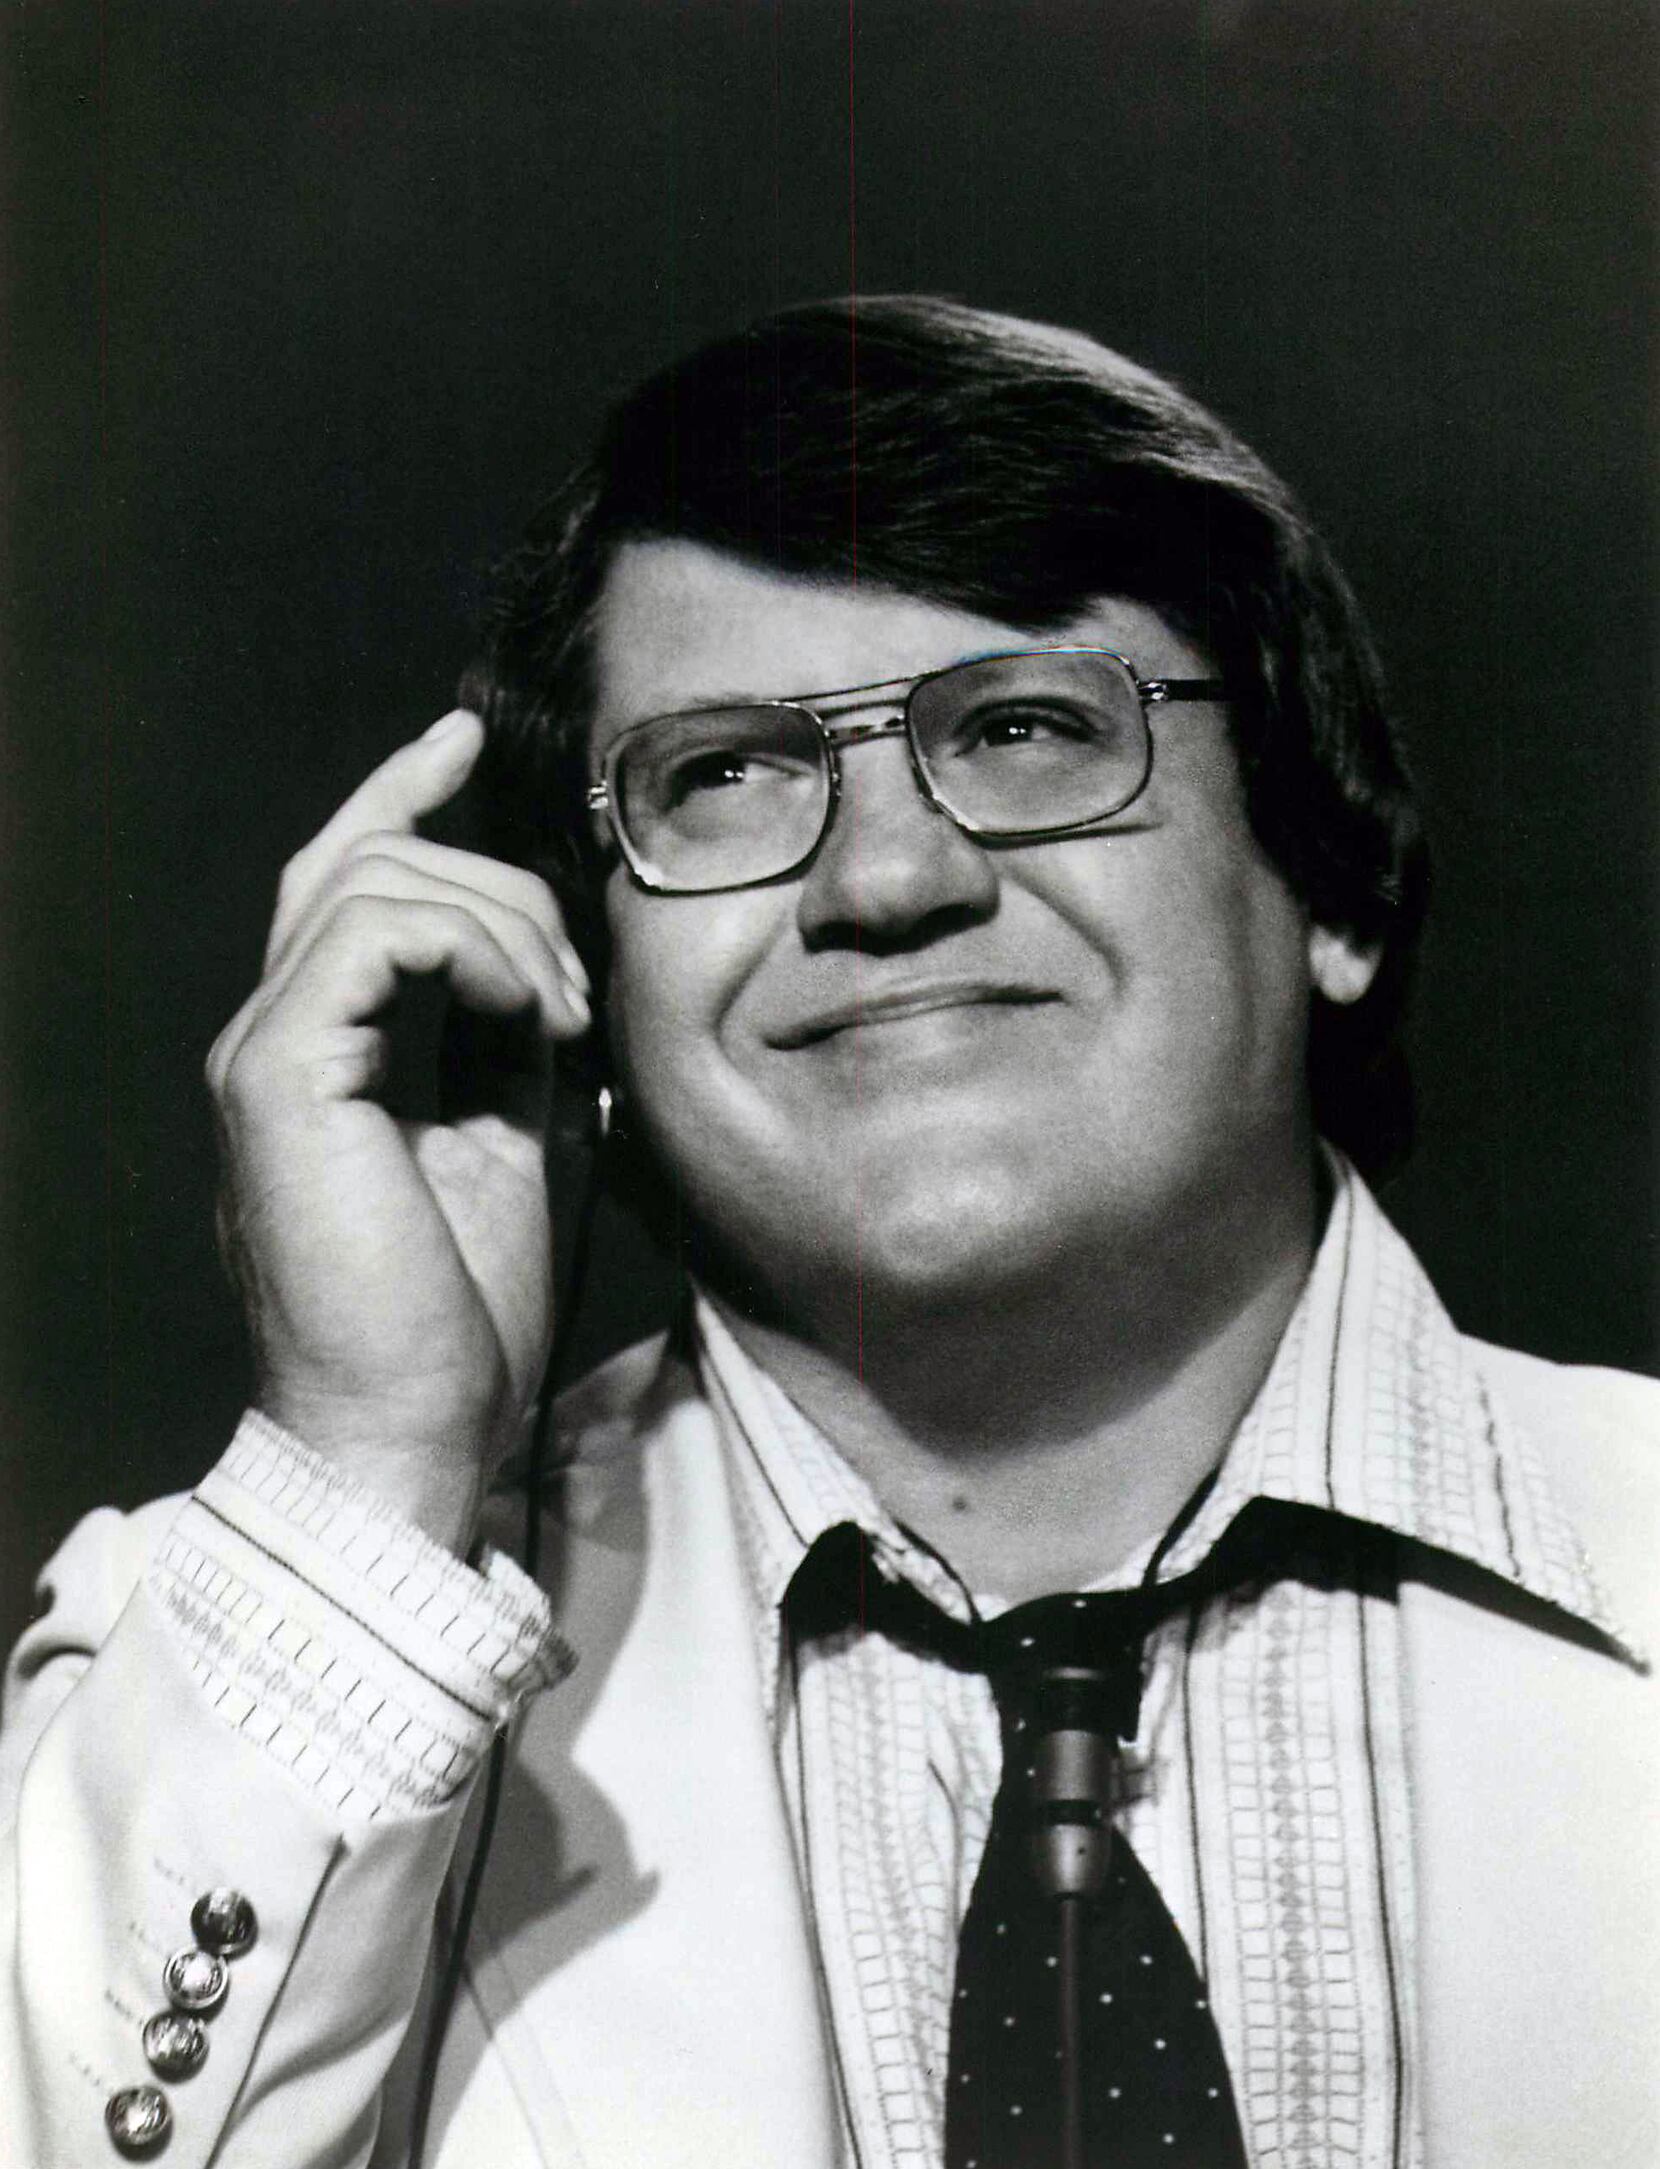 Gary native Alex Karras cared more about making Hall of Fame than he let on